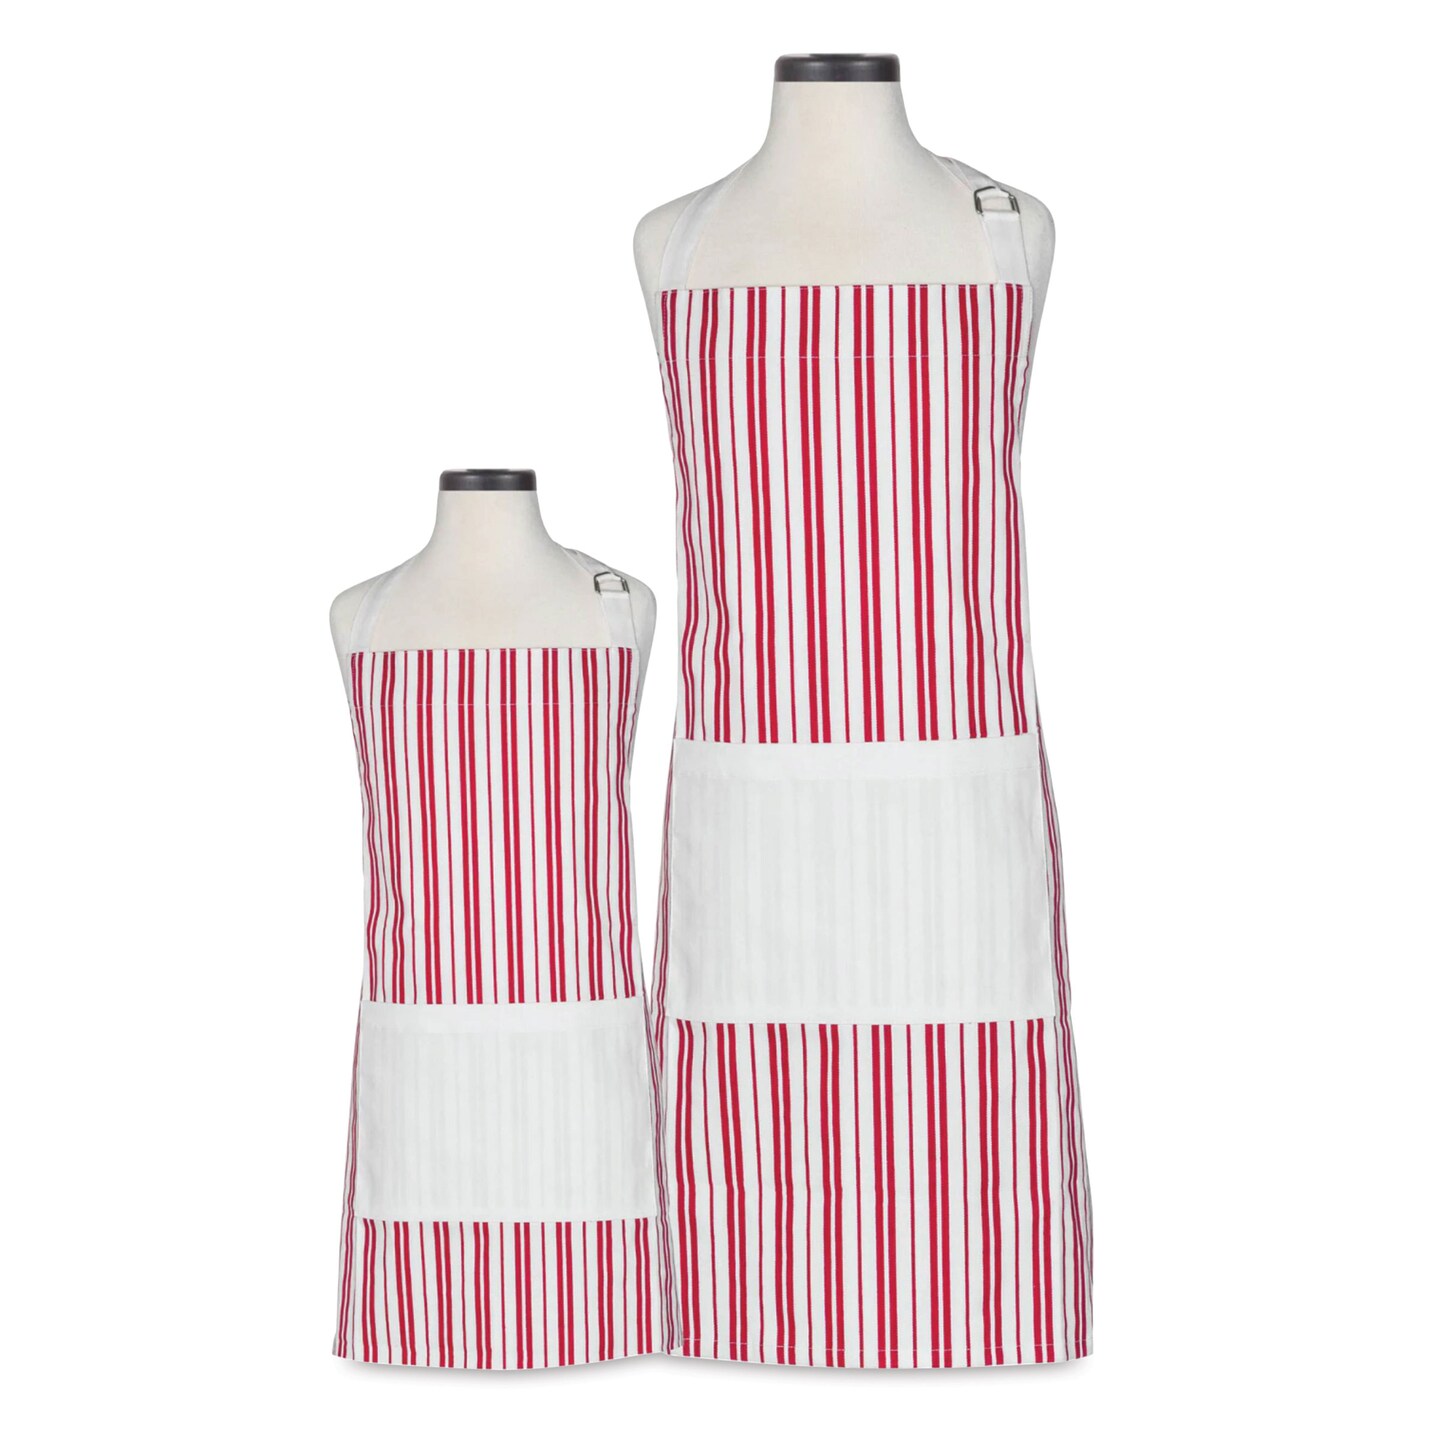 Handstand Kitchen Adult and Youth Apron Boxed Set - Classic Striped